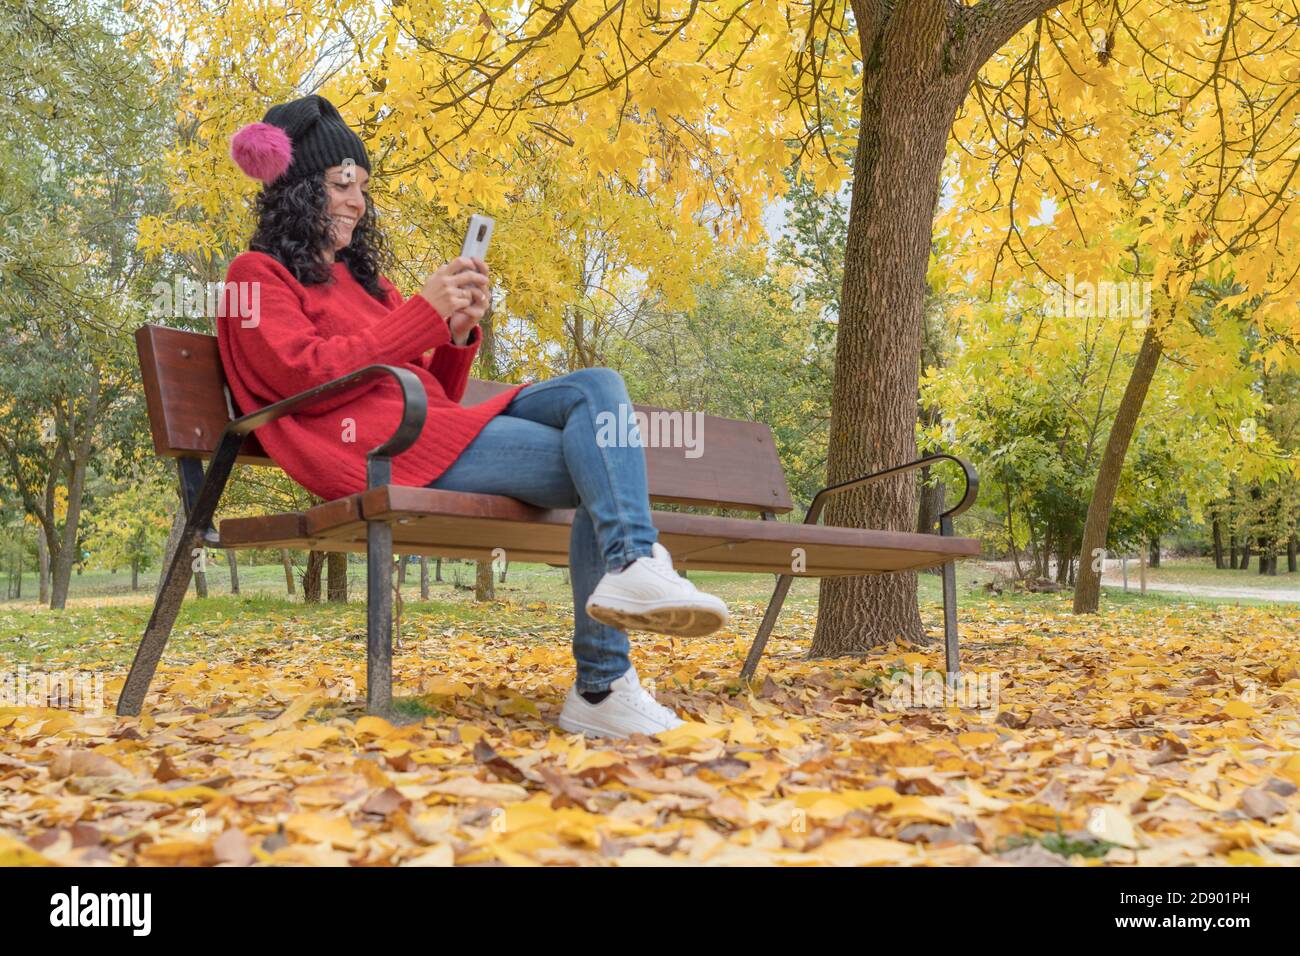 young woman in a woolen hat sitting on a wooden bench in a park laughing while chatting with her mobile. background of colored trees and fallen leaves Stock Photo